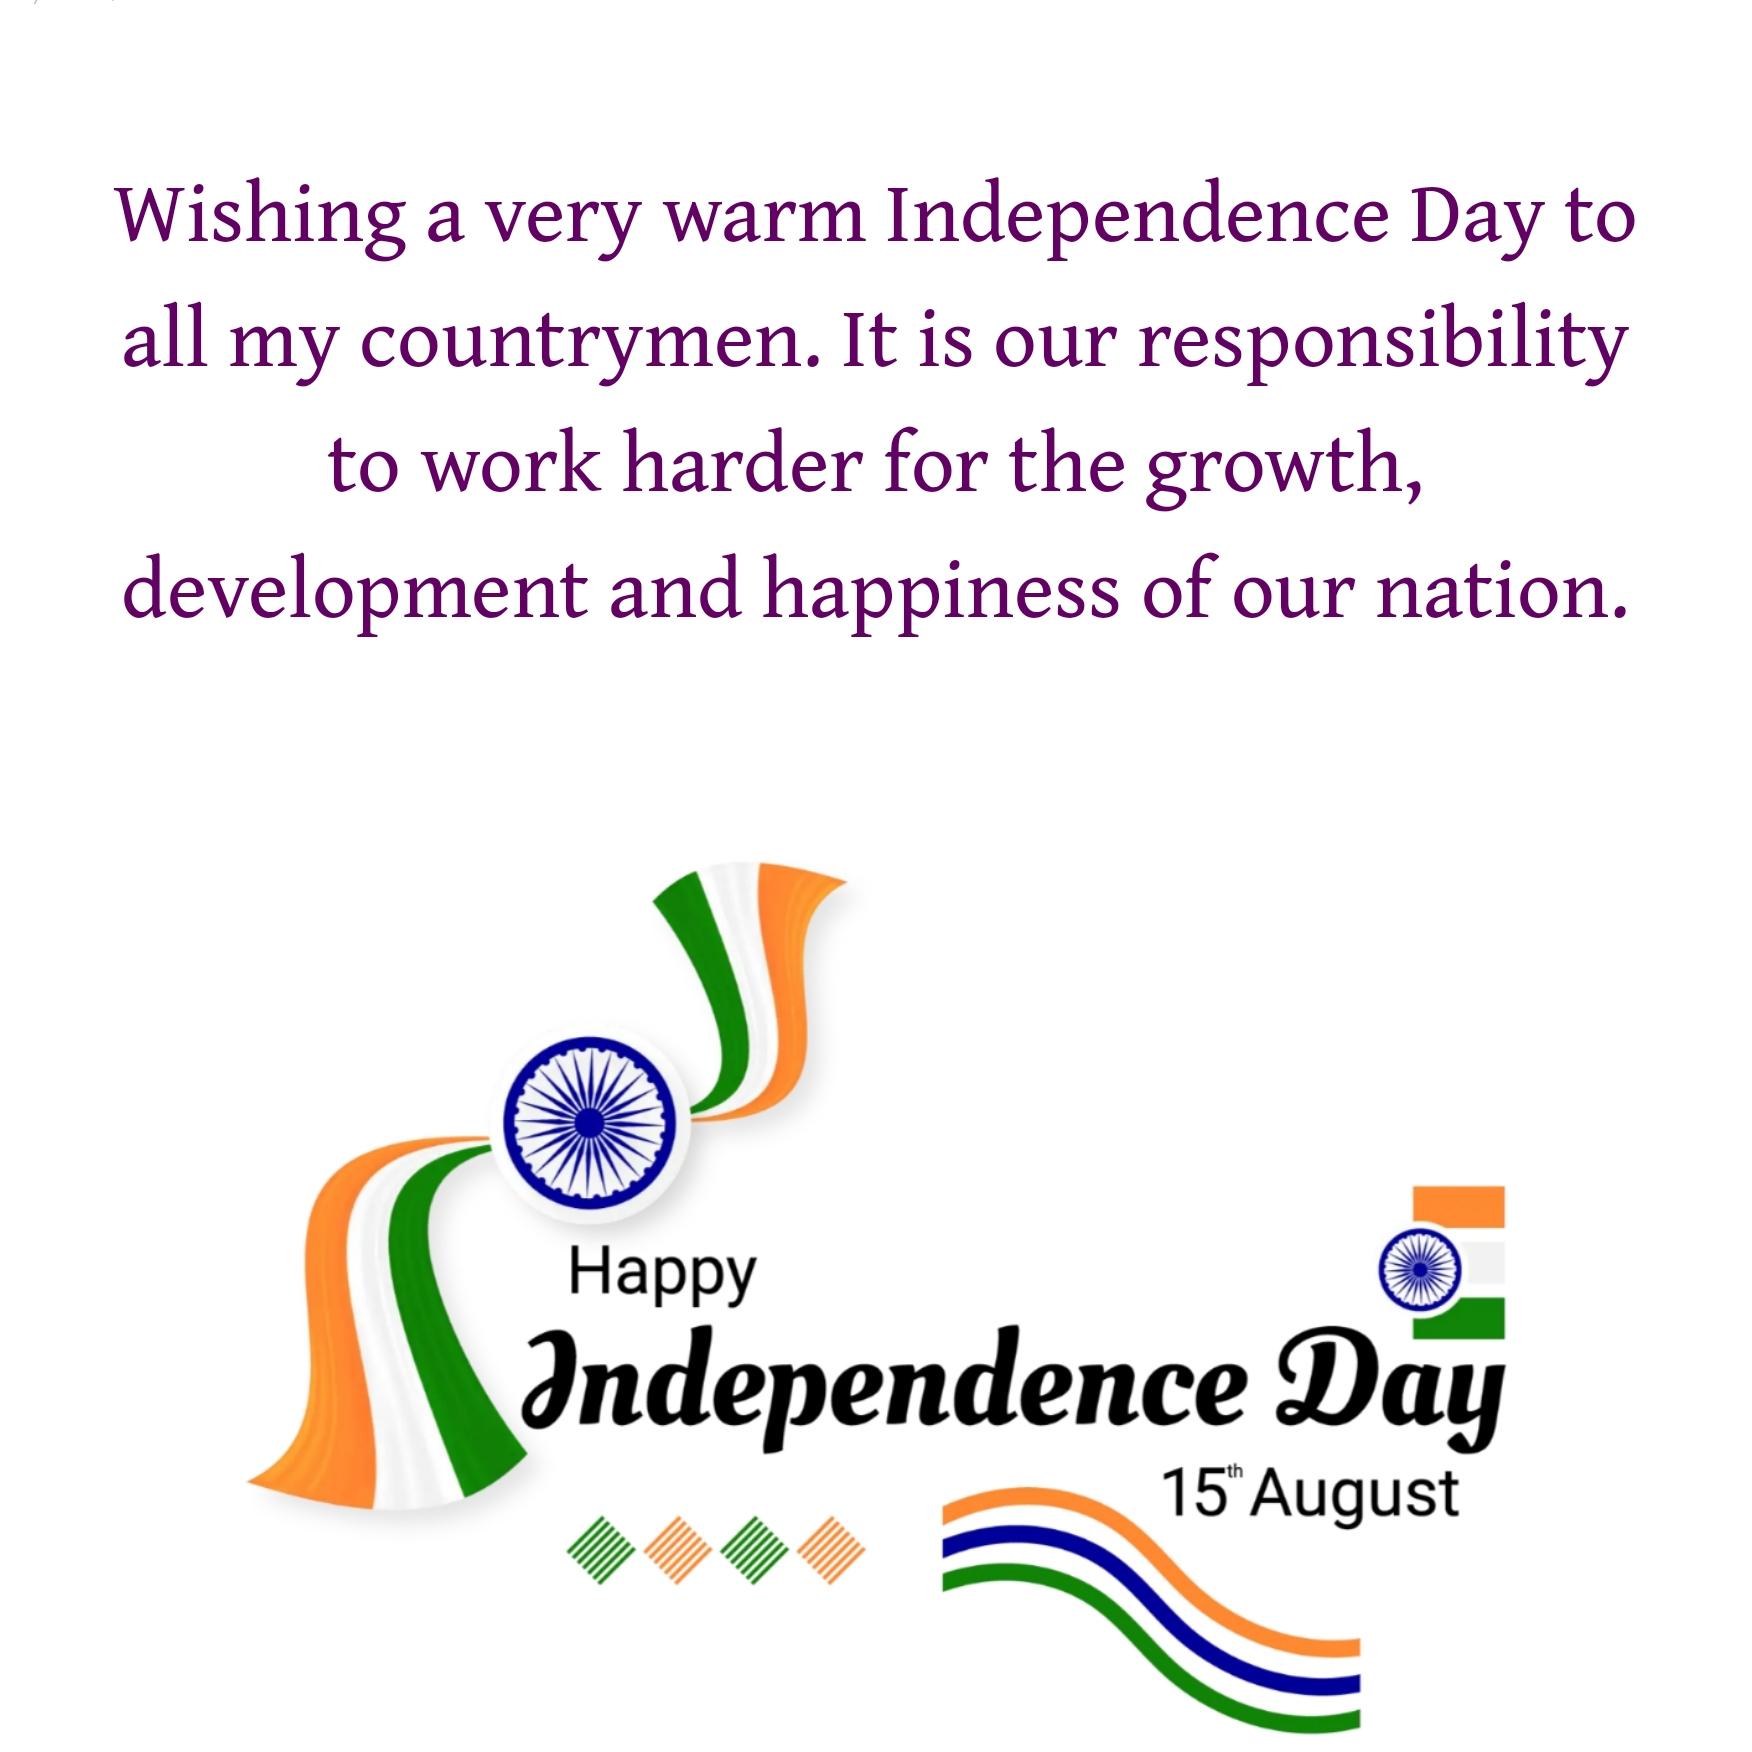 Wishing a very warm Independence Day to all my countrymen